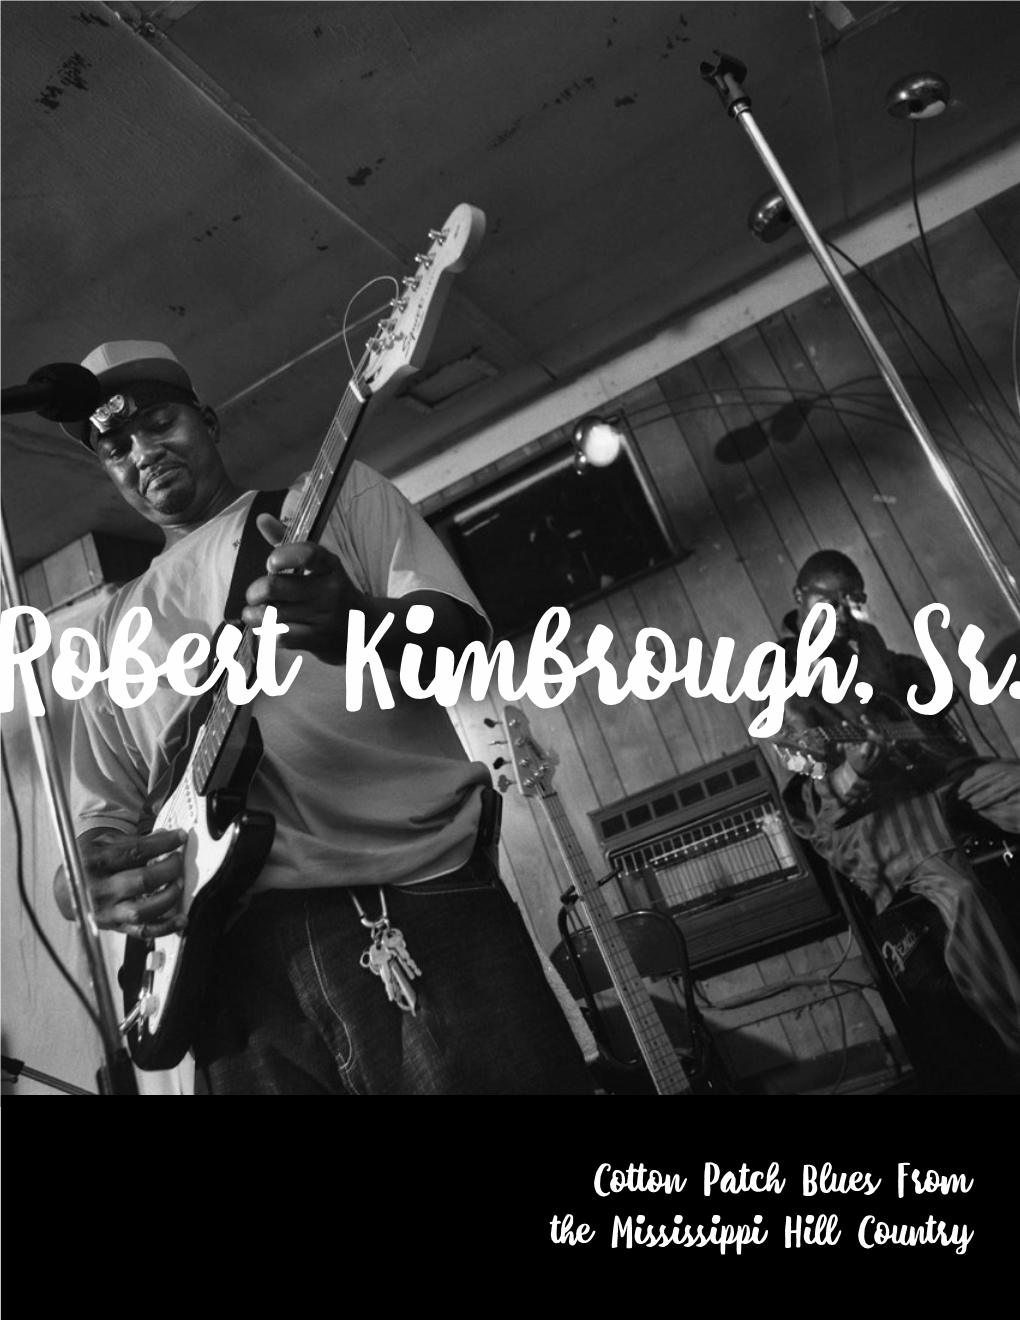 Cotton Patch Blues from the Mississippi Hill Country Robert Kimbrough, Sr